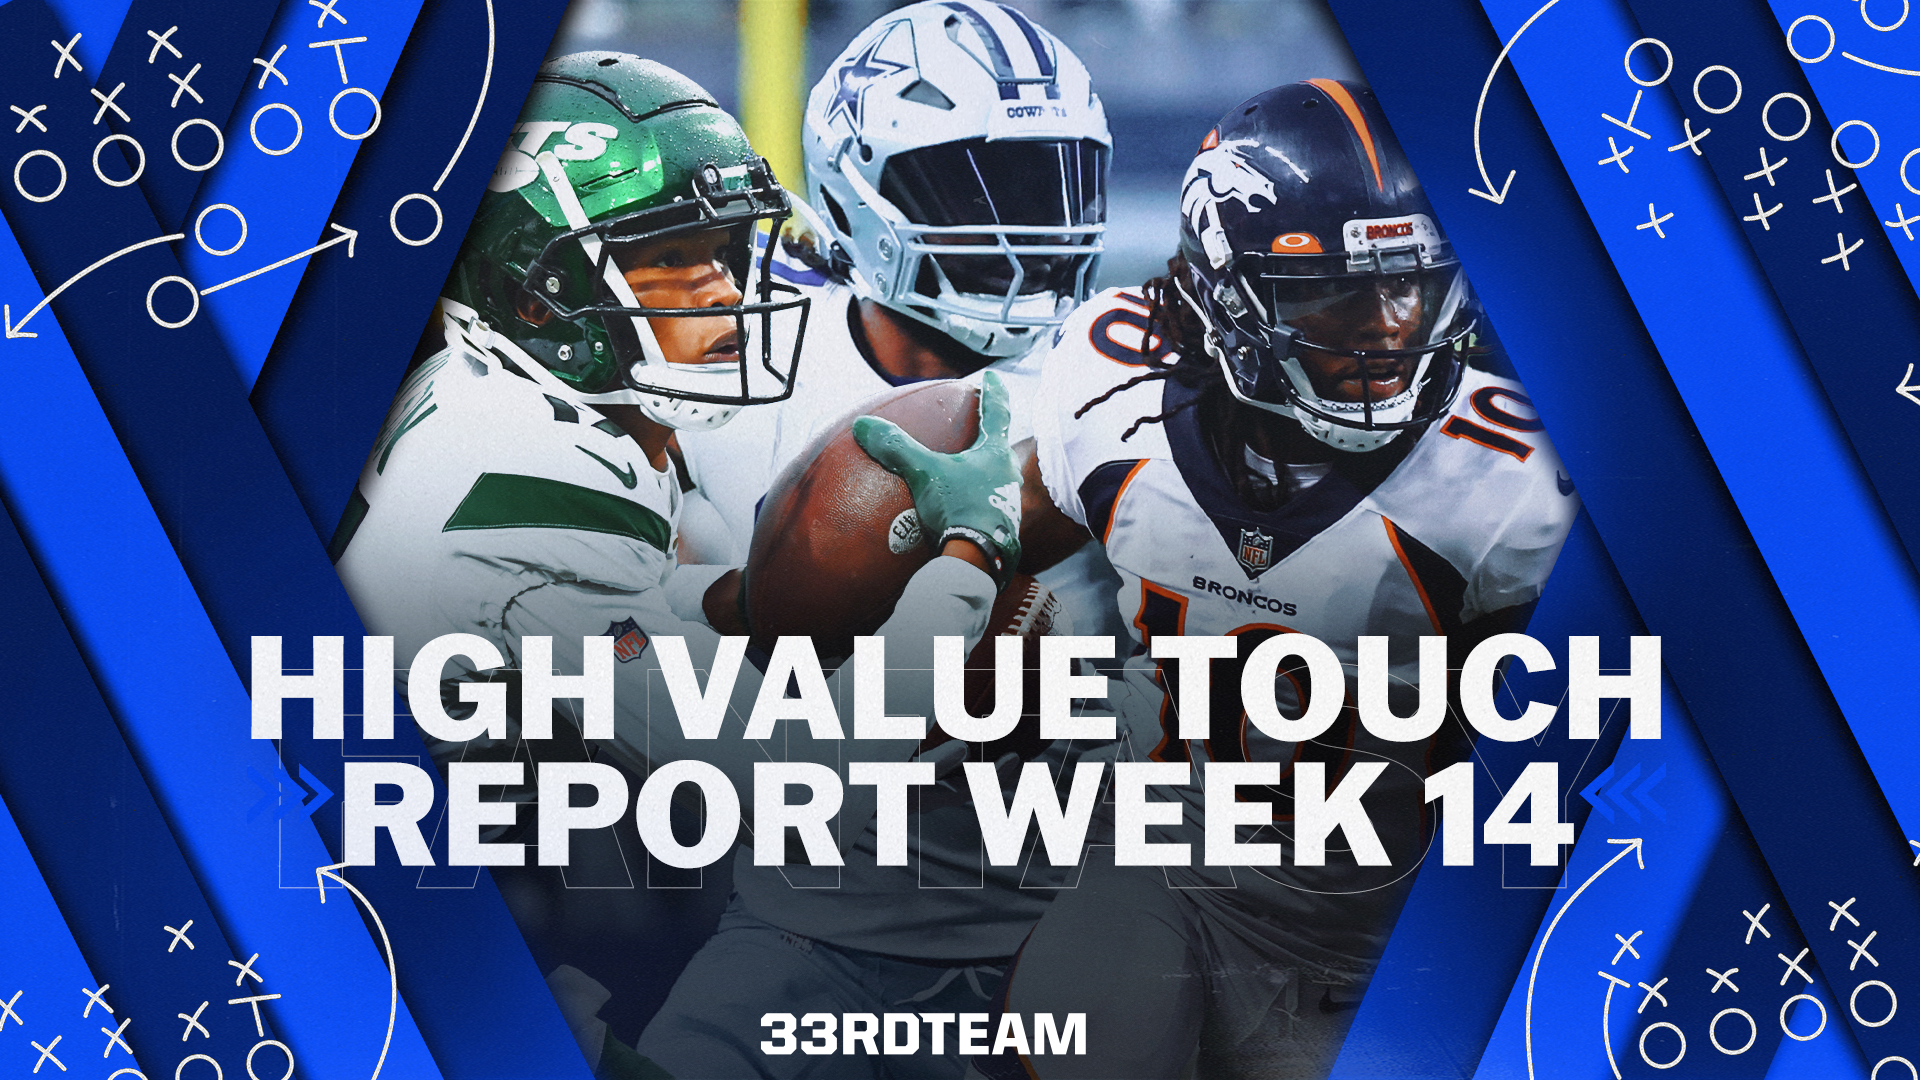 High-Value Touch Report: Week 14 Fantasy Football Rushing & Receiving Data